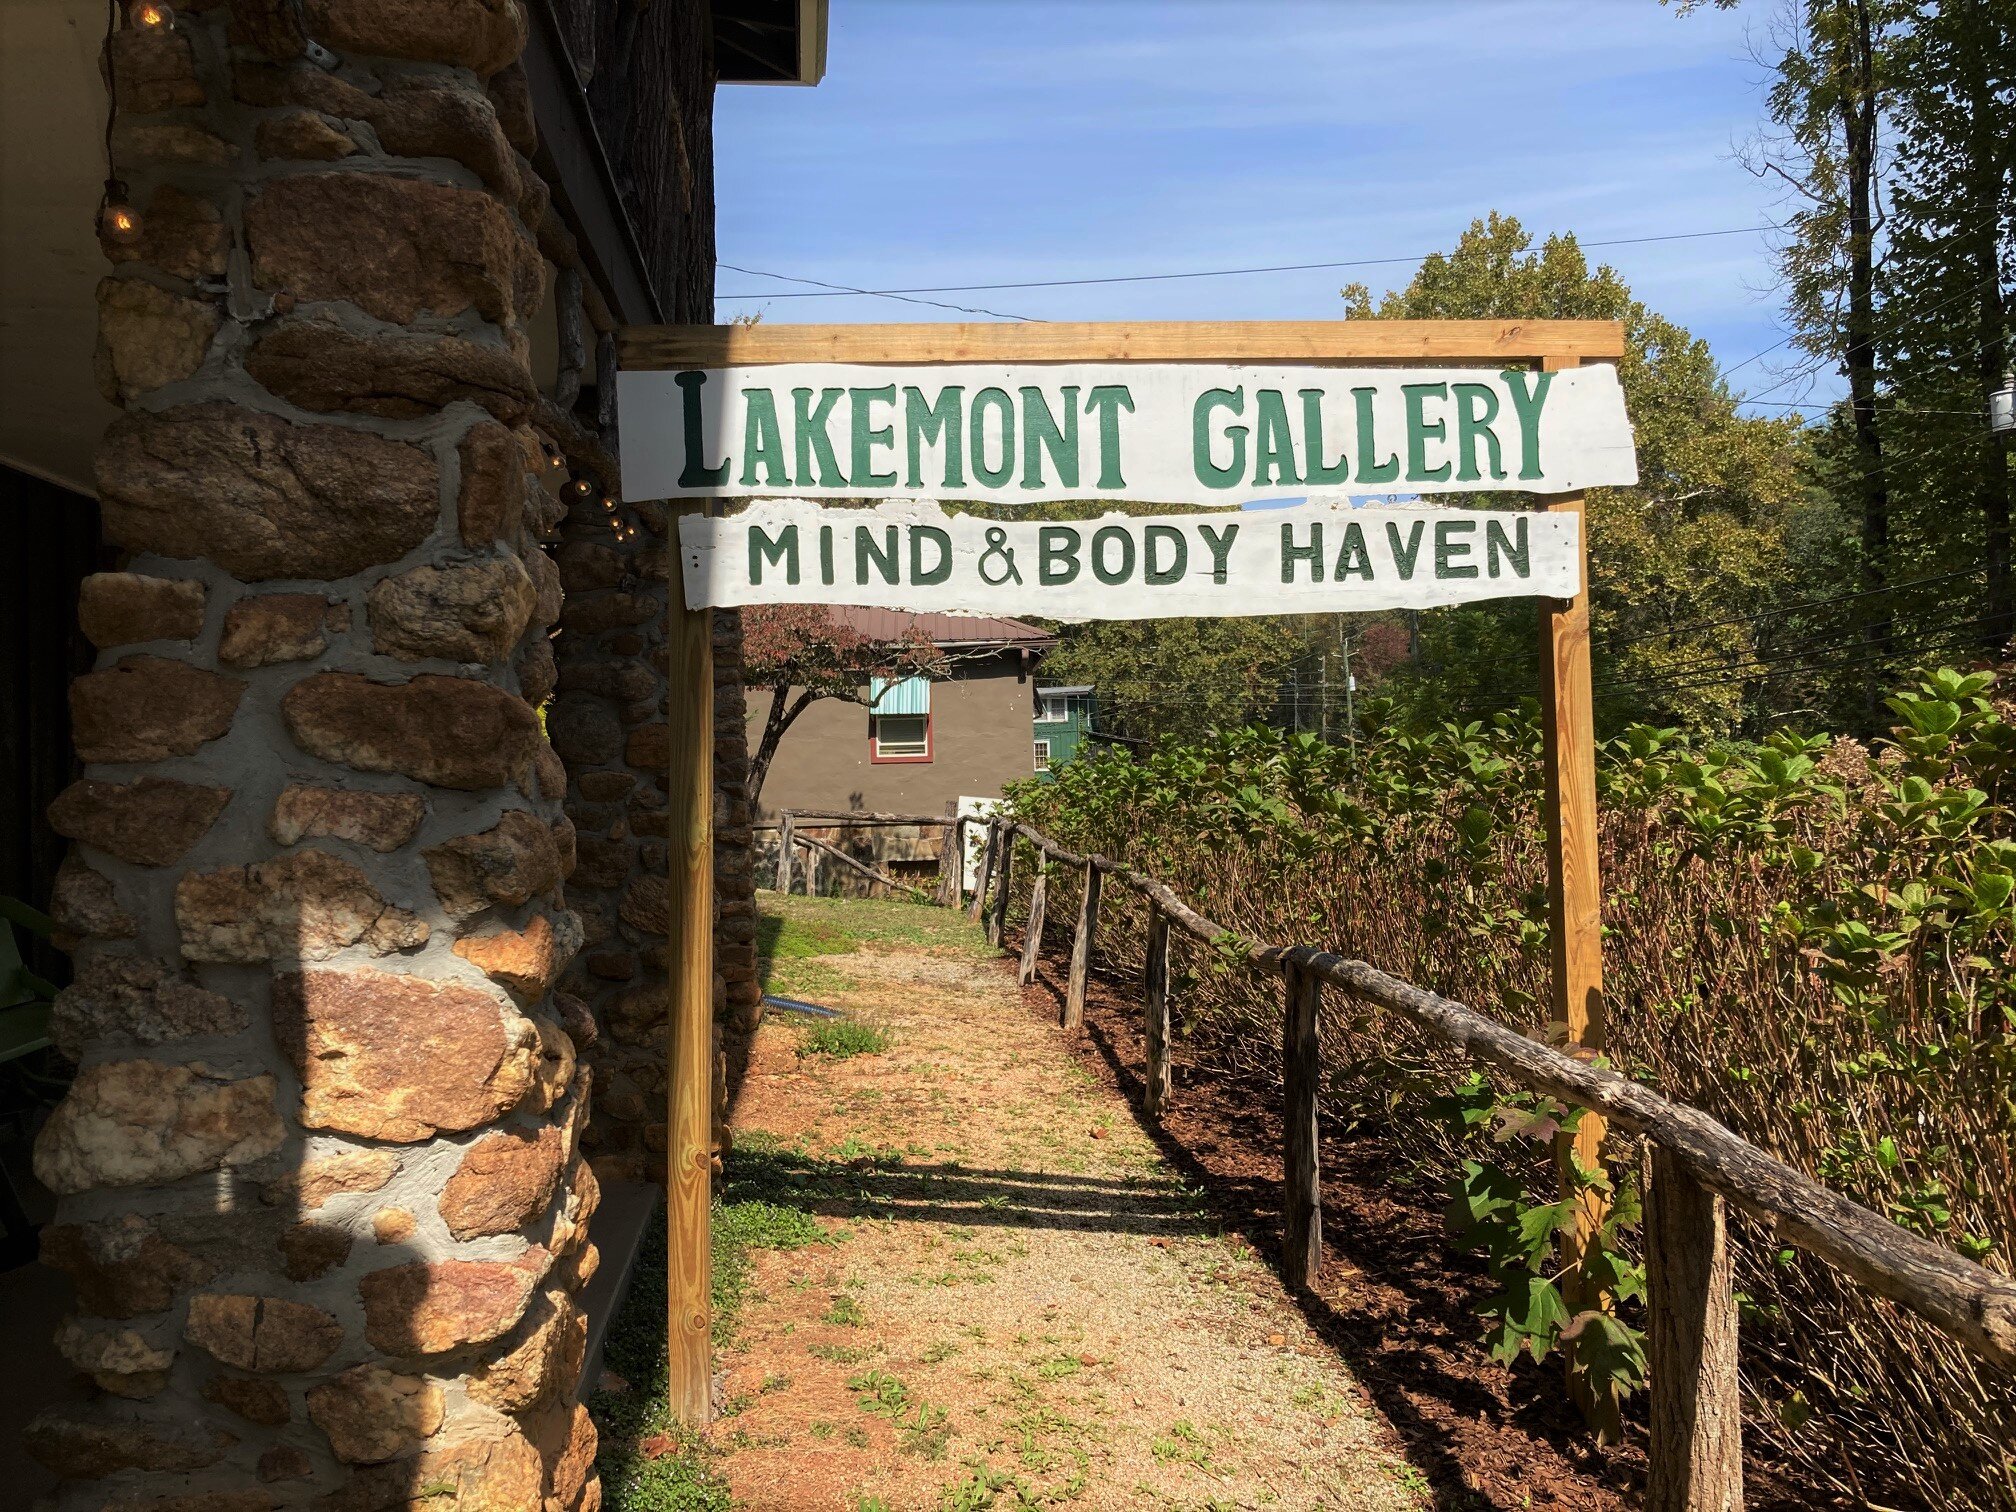 Lakemont Gallery